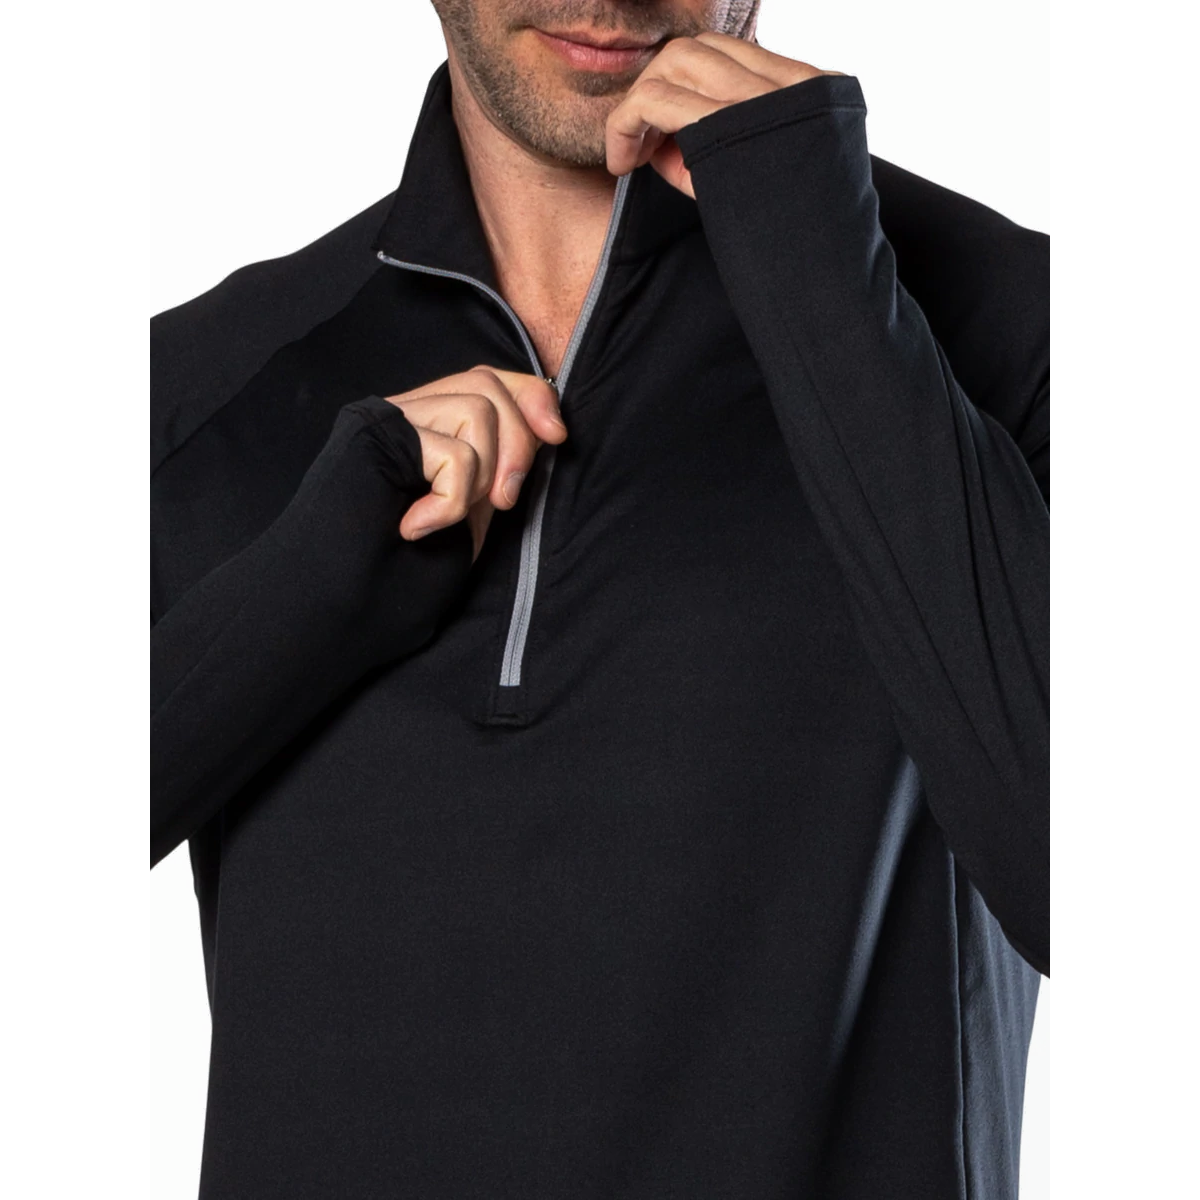 Nathan Tempo 1/4 Zip 2.0 Longsleeve, , large image number null